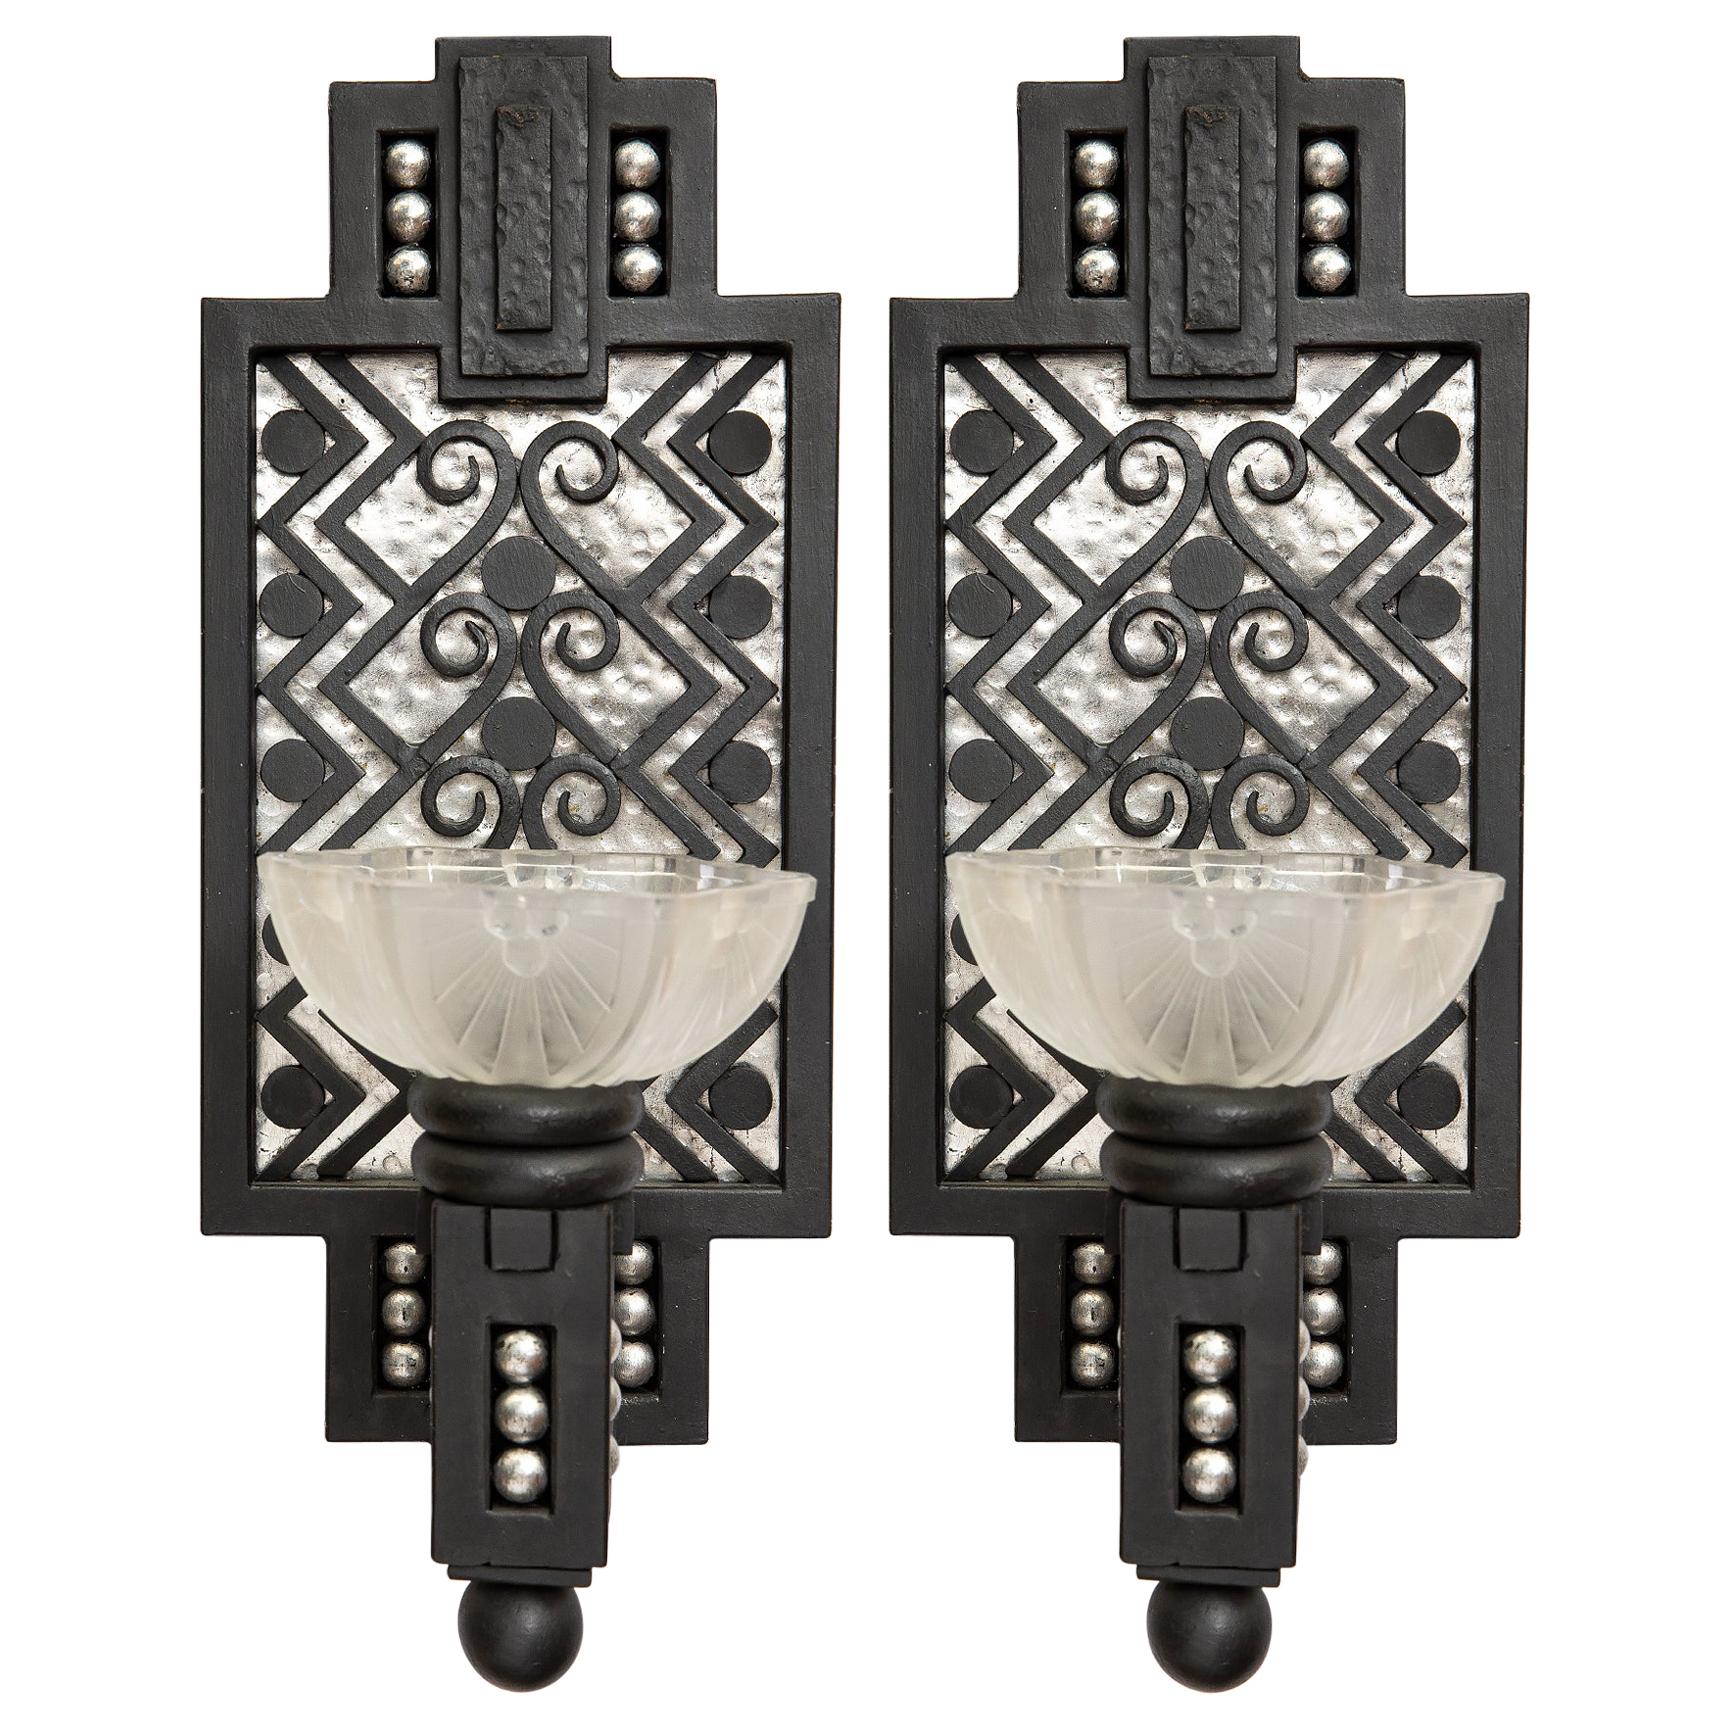 Pair of Wrought Iron and Glass Sconces, Art Deco Period, France, circa 1930